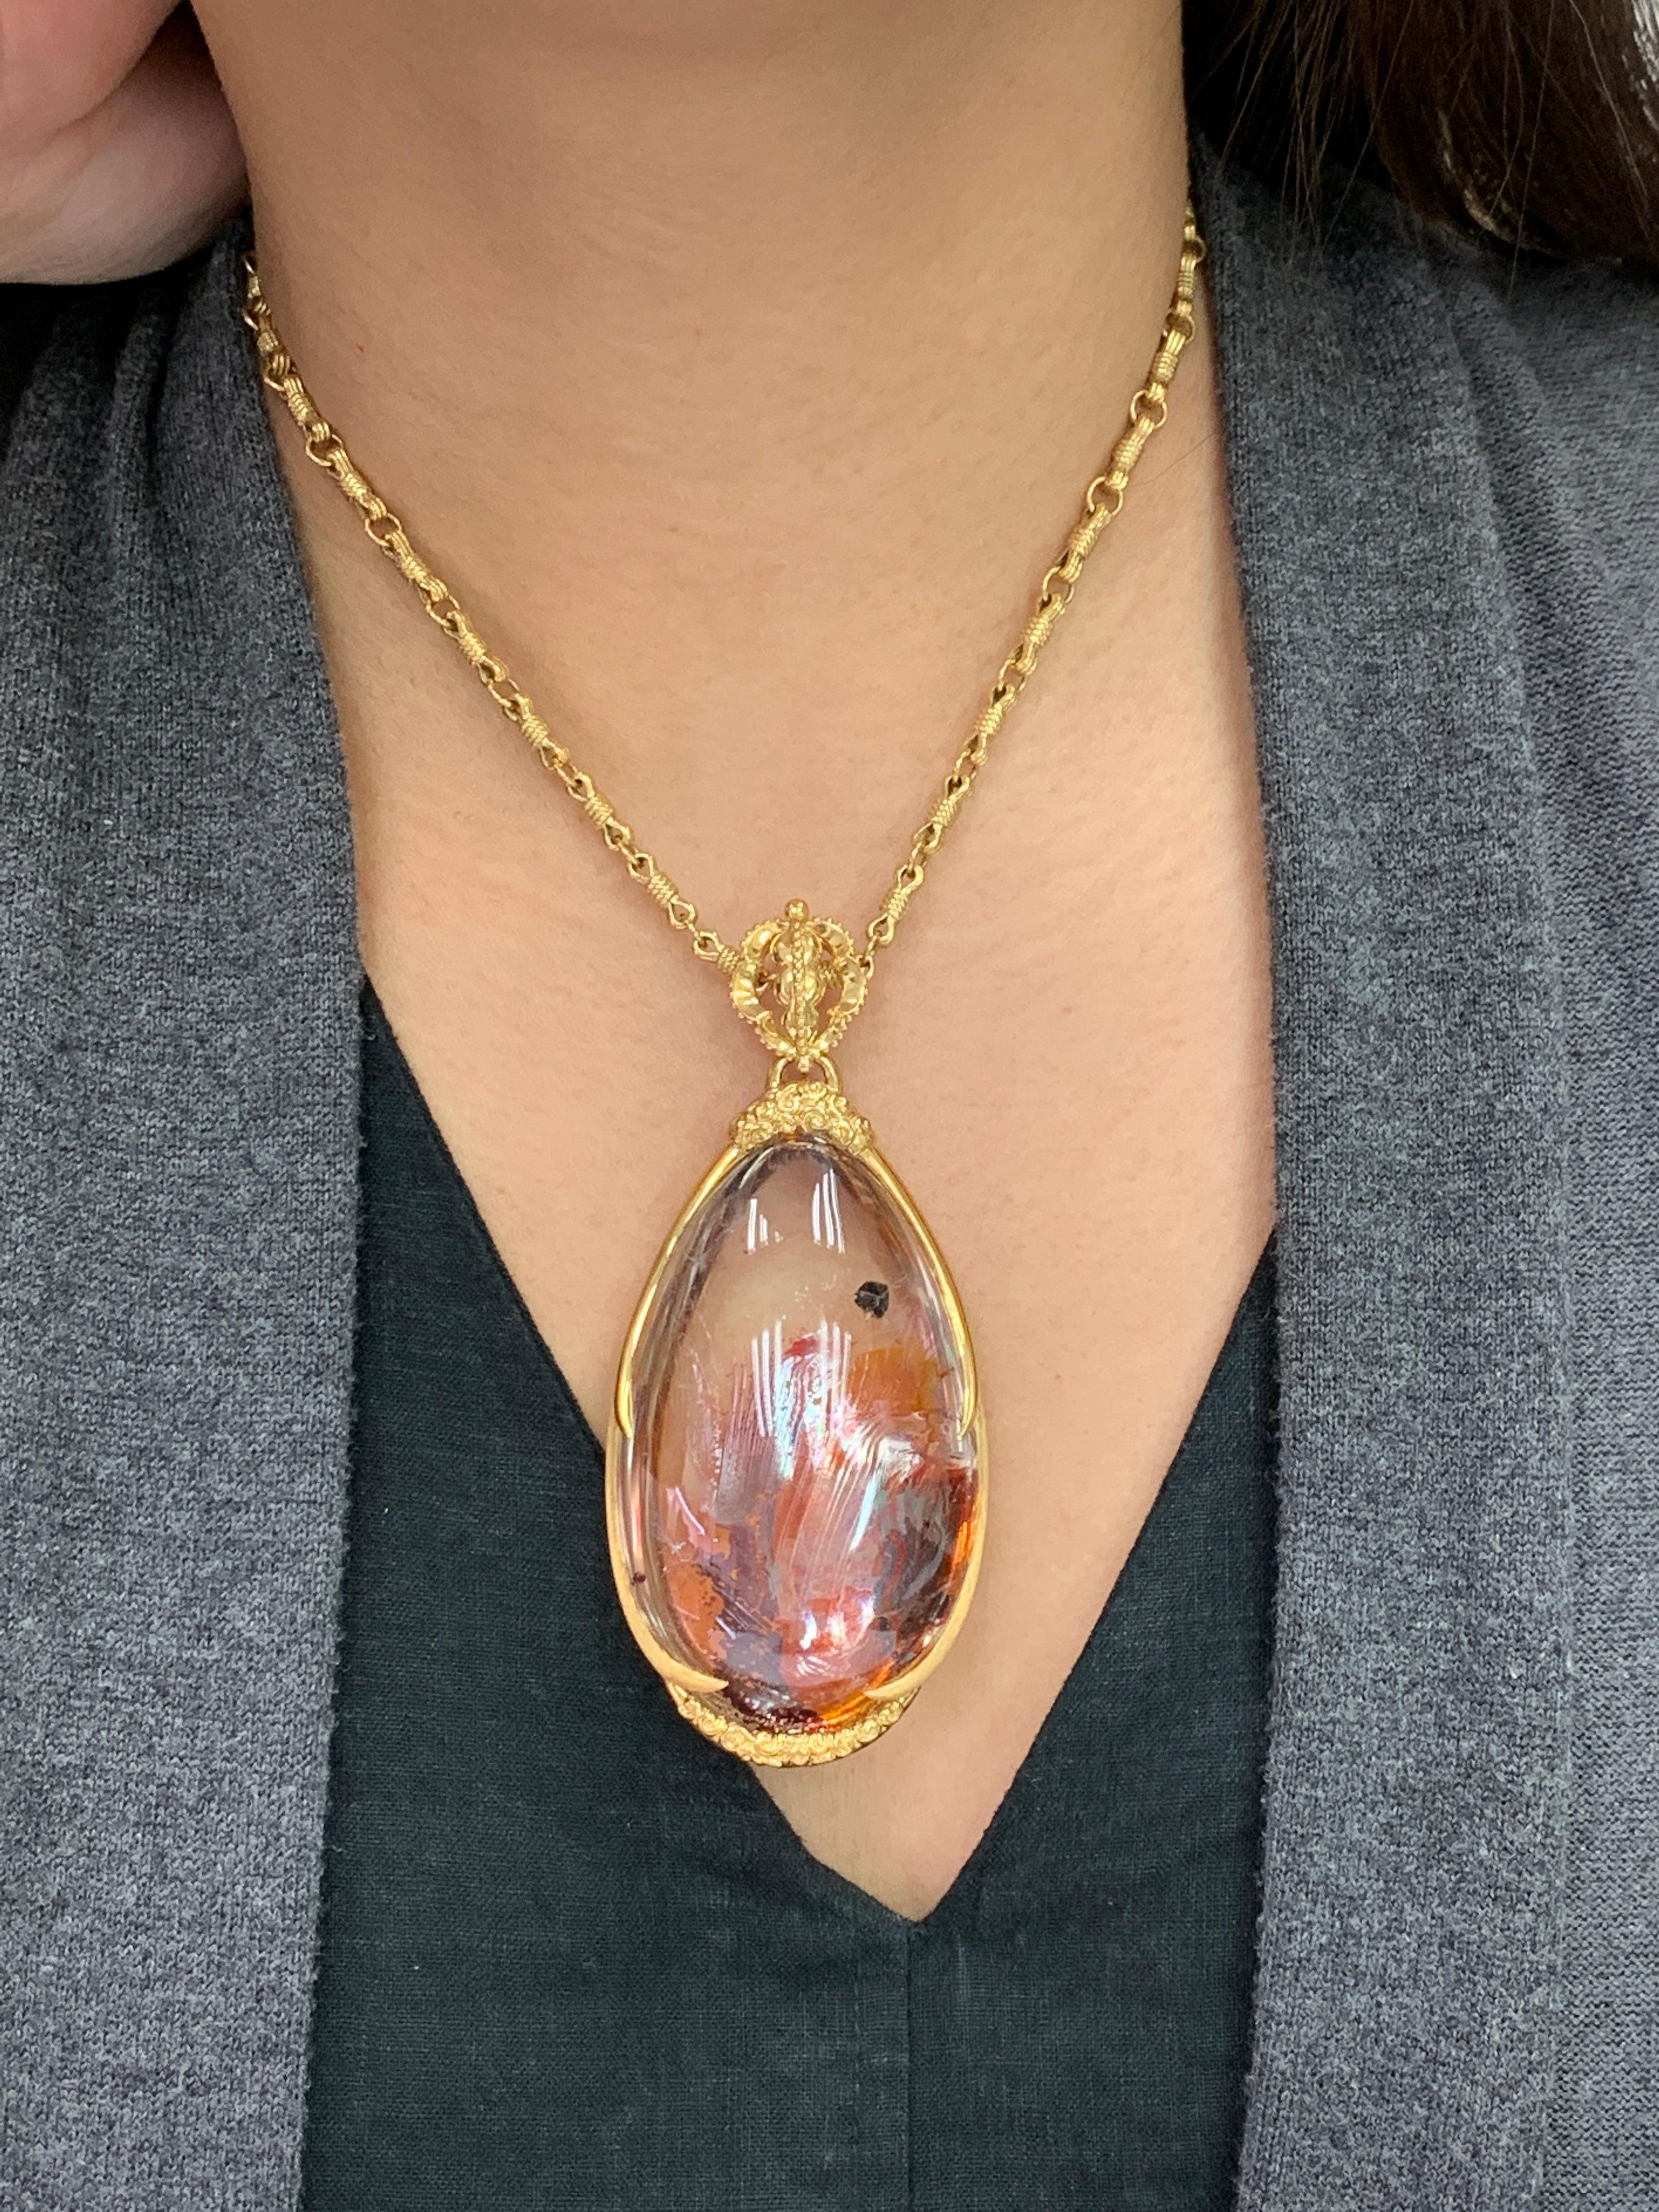 This is not something you see often. This pendant is absolutely a statement piece. It is big, it is substantial and it is impressive. Finding a large piece of natural dendritic quartz crystal this clean and nearly colorless is not easy. Furthermore,